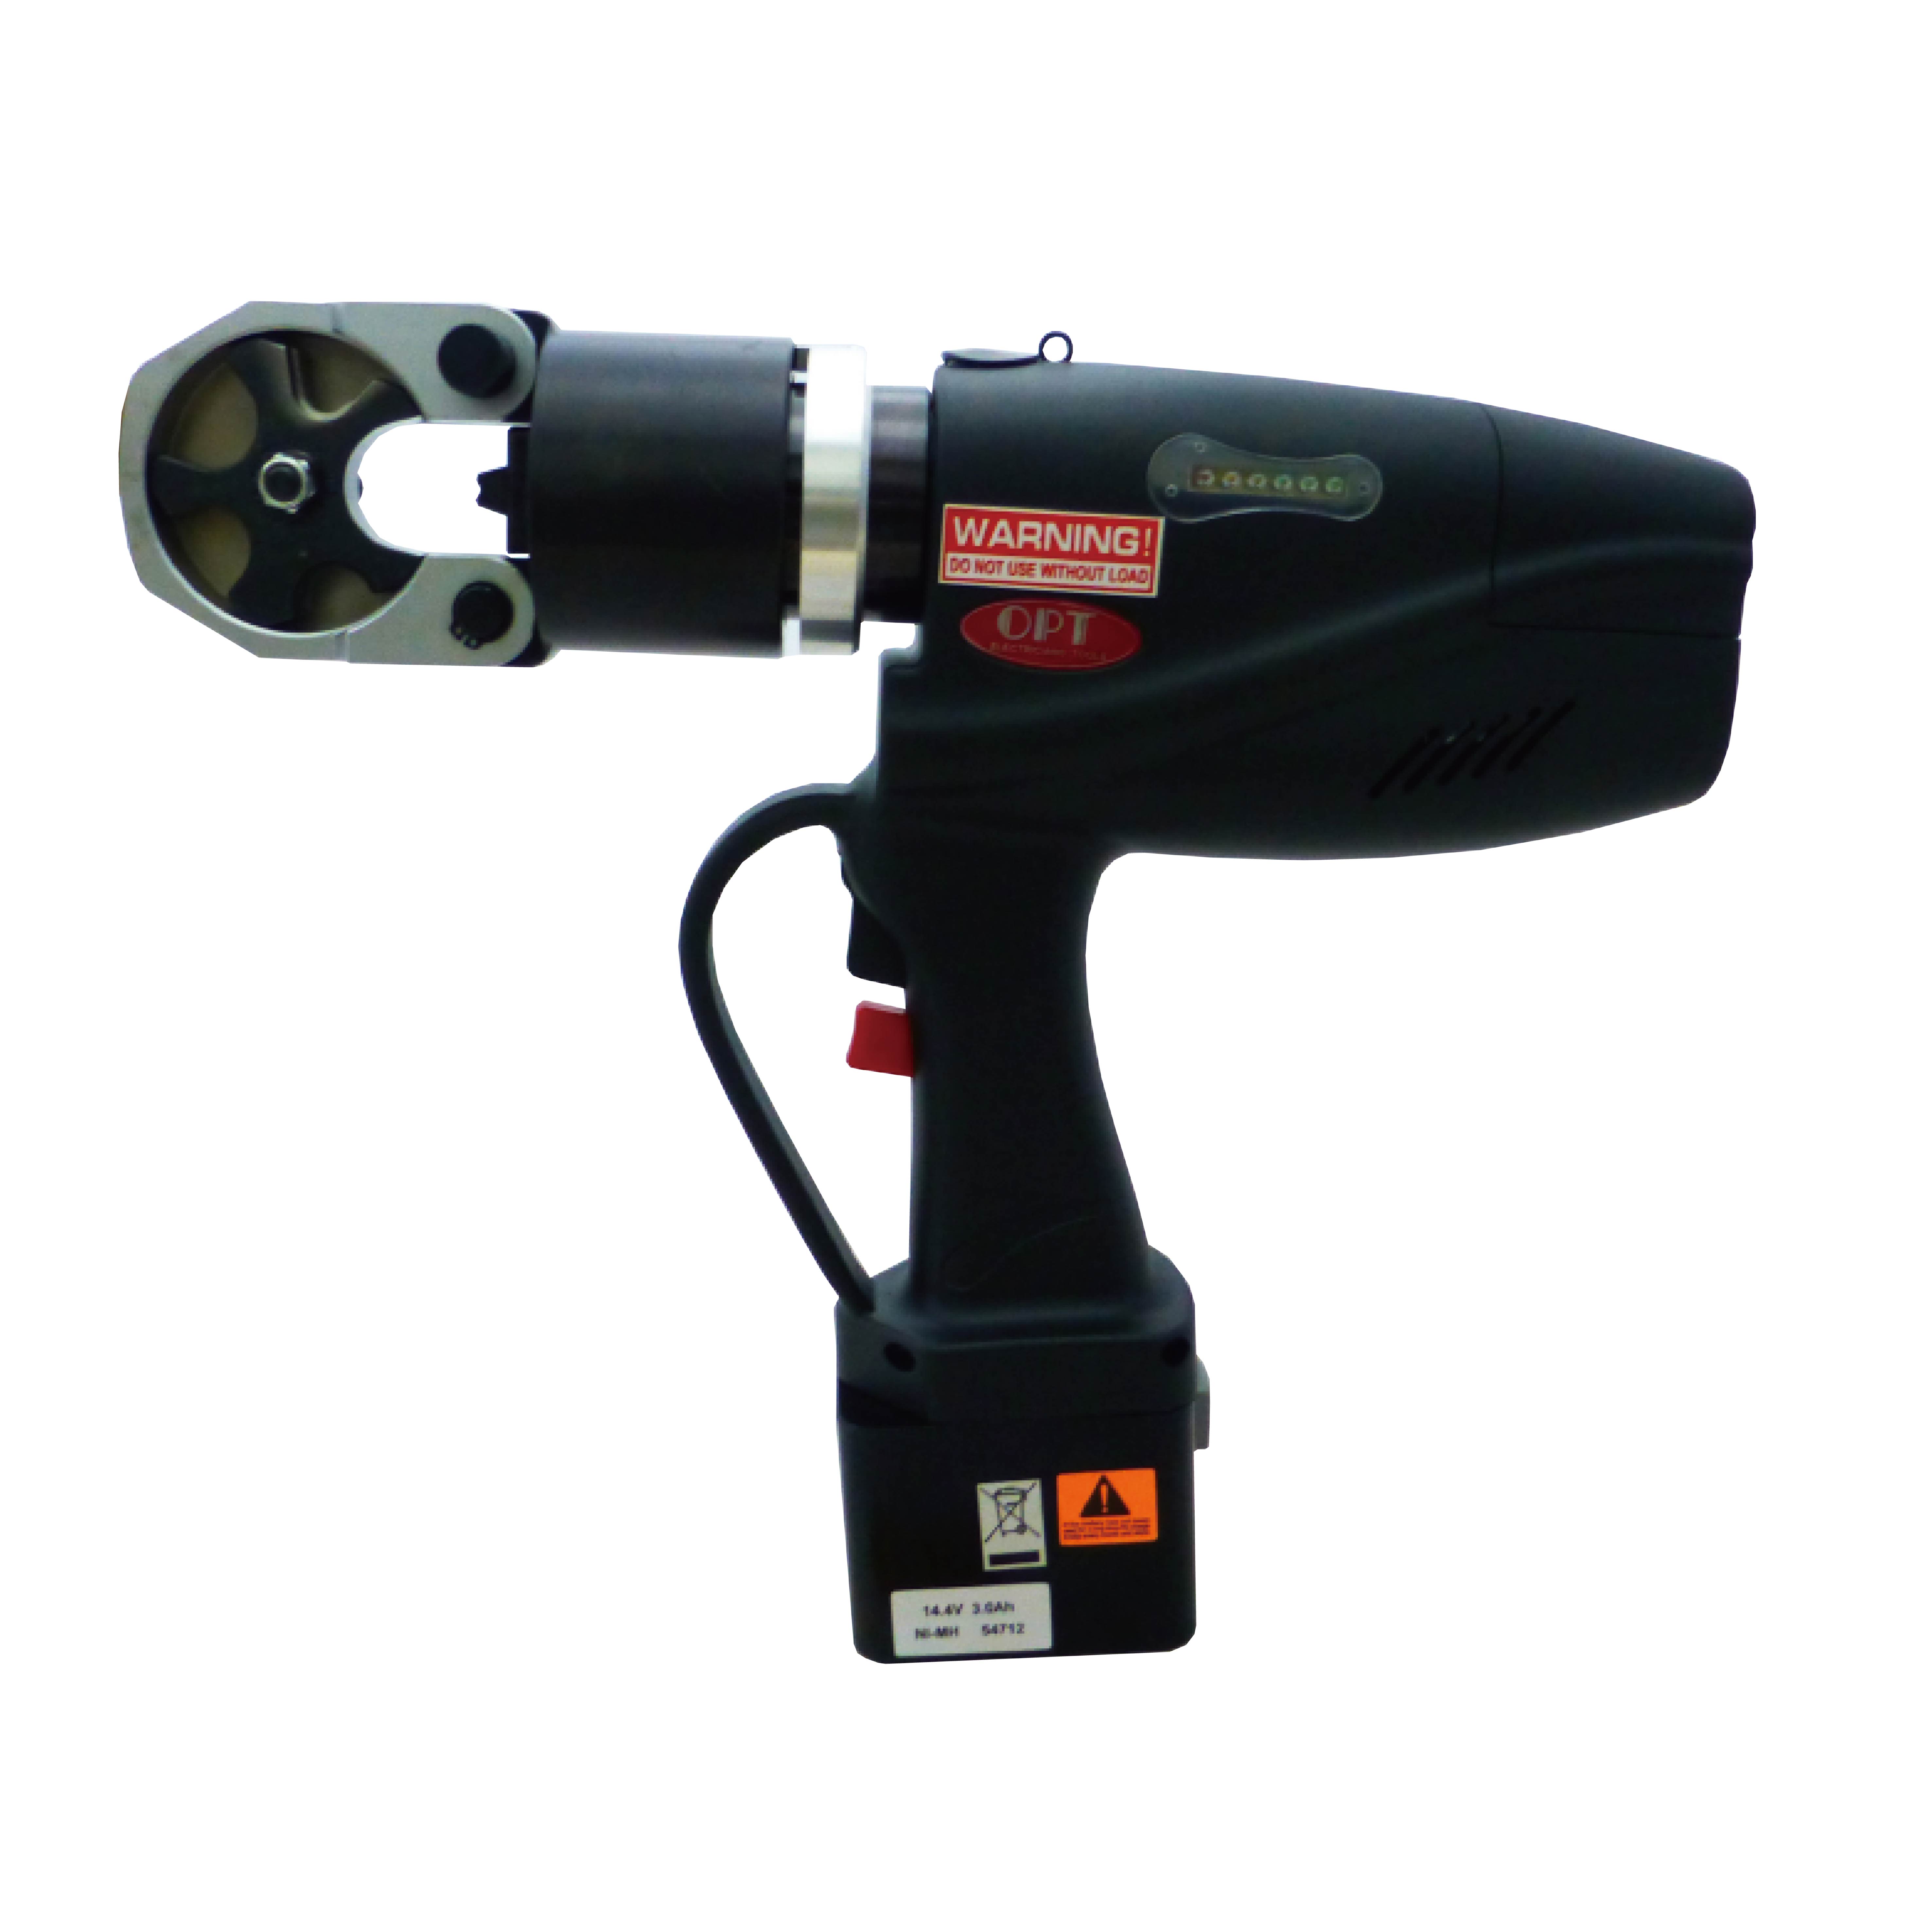 EPL-2101 CORDLESS HYDRAULIC CRIMPING TOOLS-EPL-2101